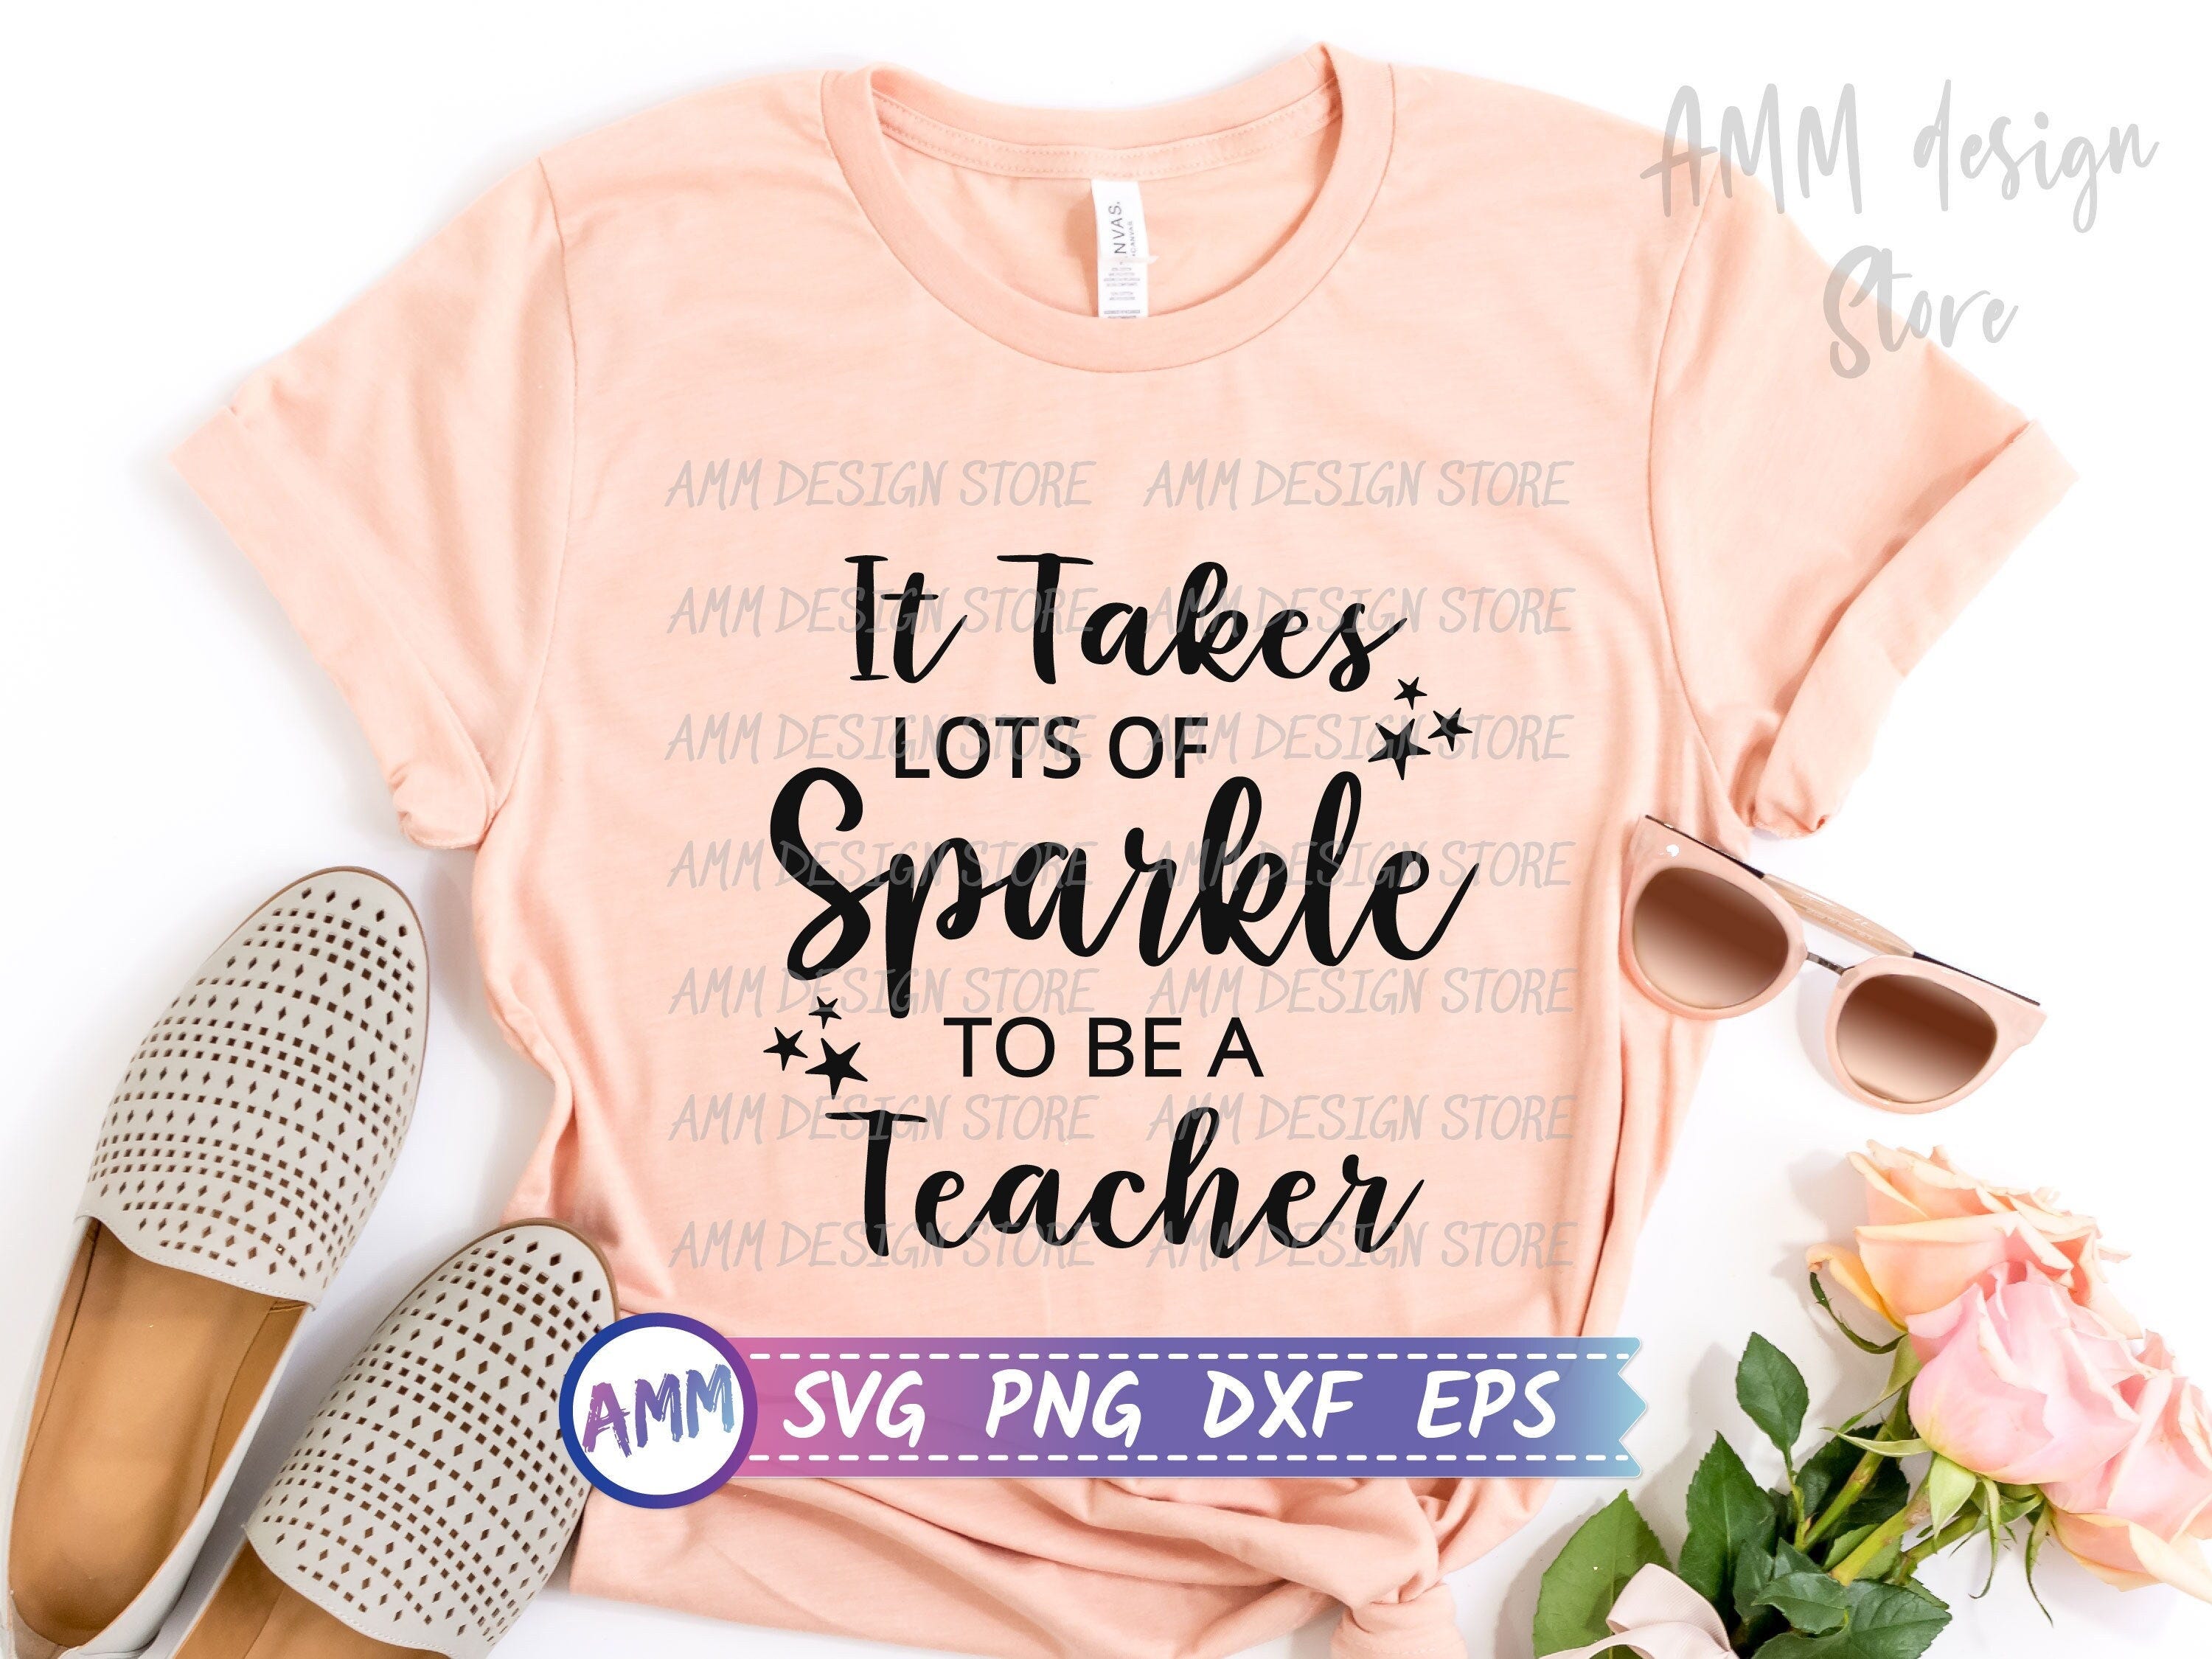 Teacher svg, It Takes Lots of Sparkle to be a Teacher svg, Teacher quote svg, Funny teacher svg, Teacher life svg,Eps, Dxf, Png